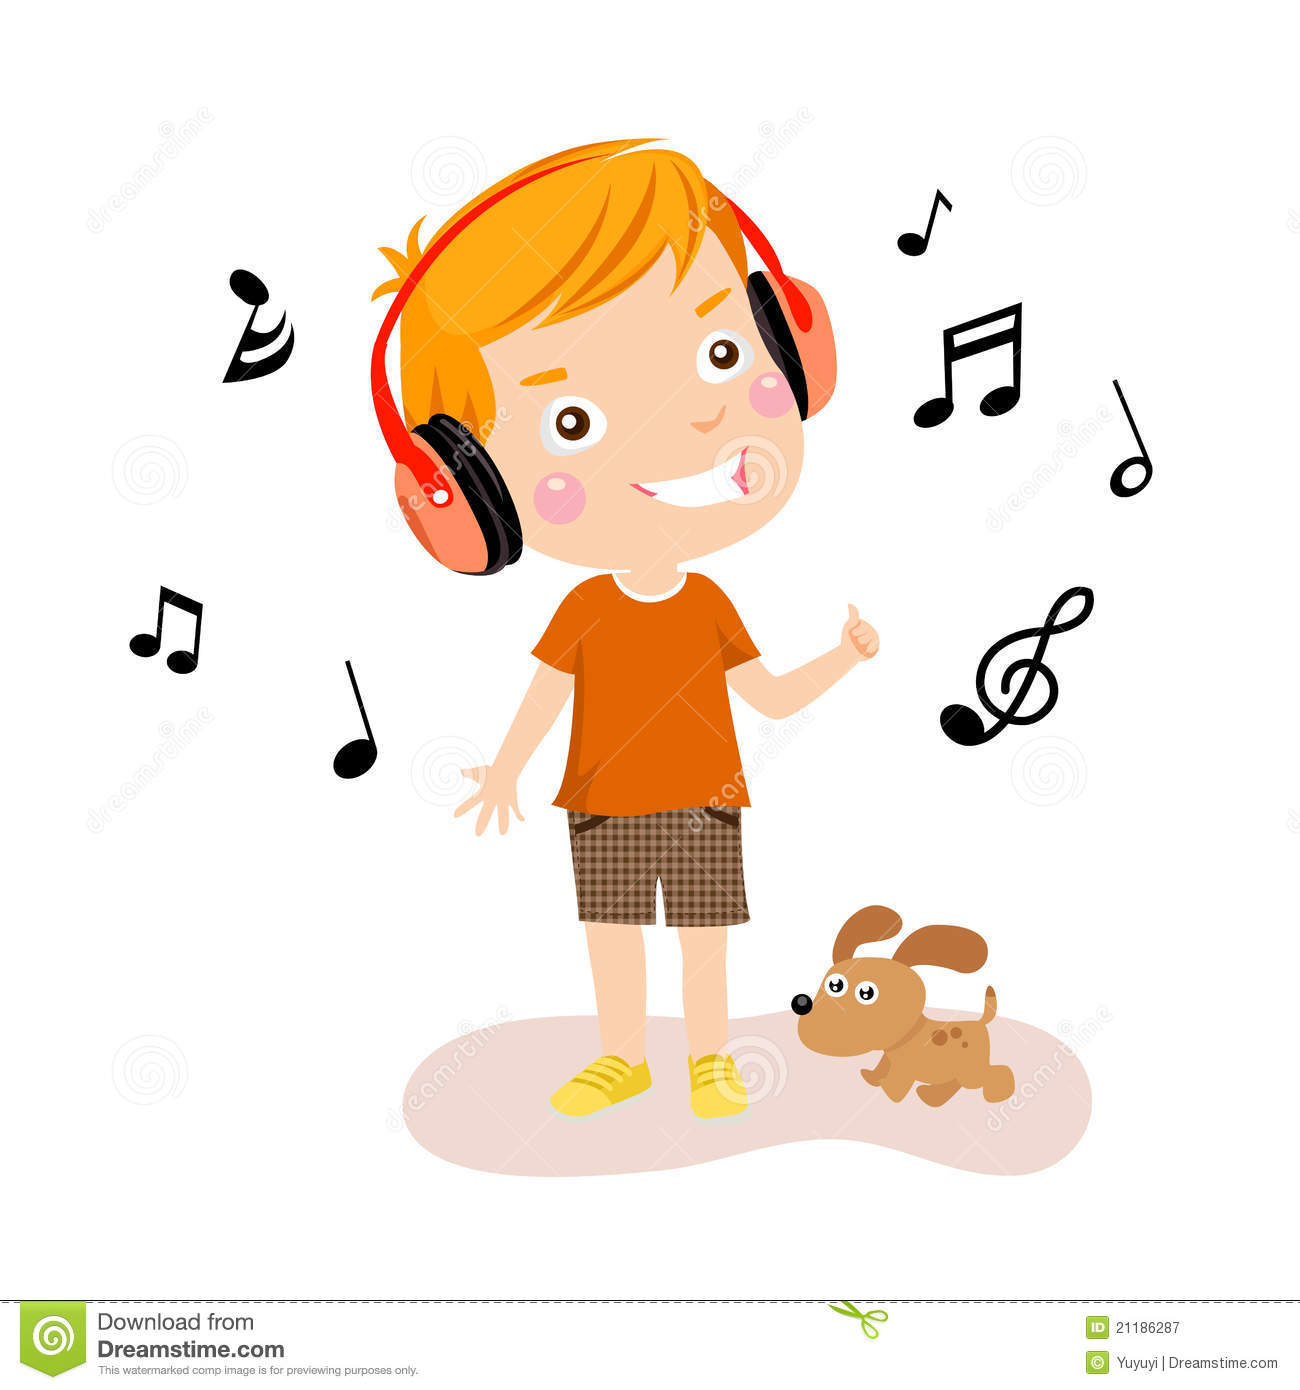 listening to music clipart tumblr